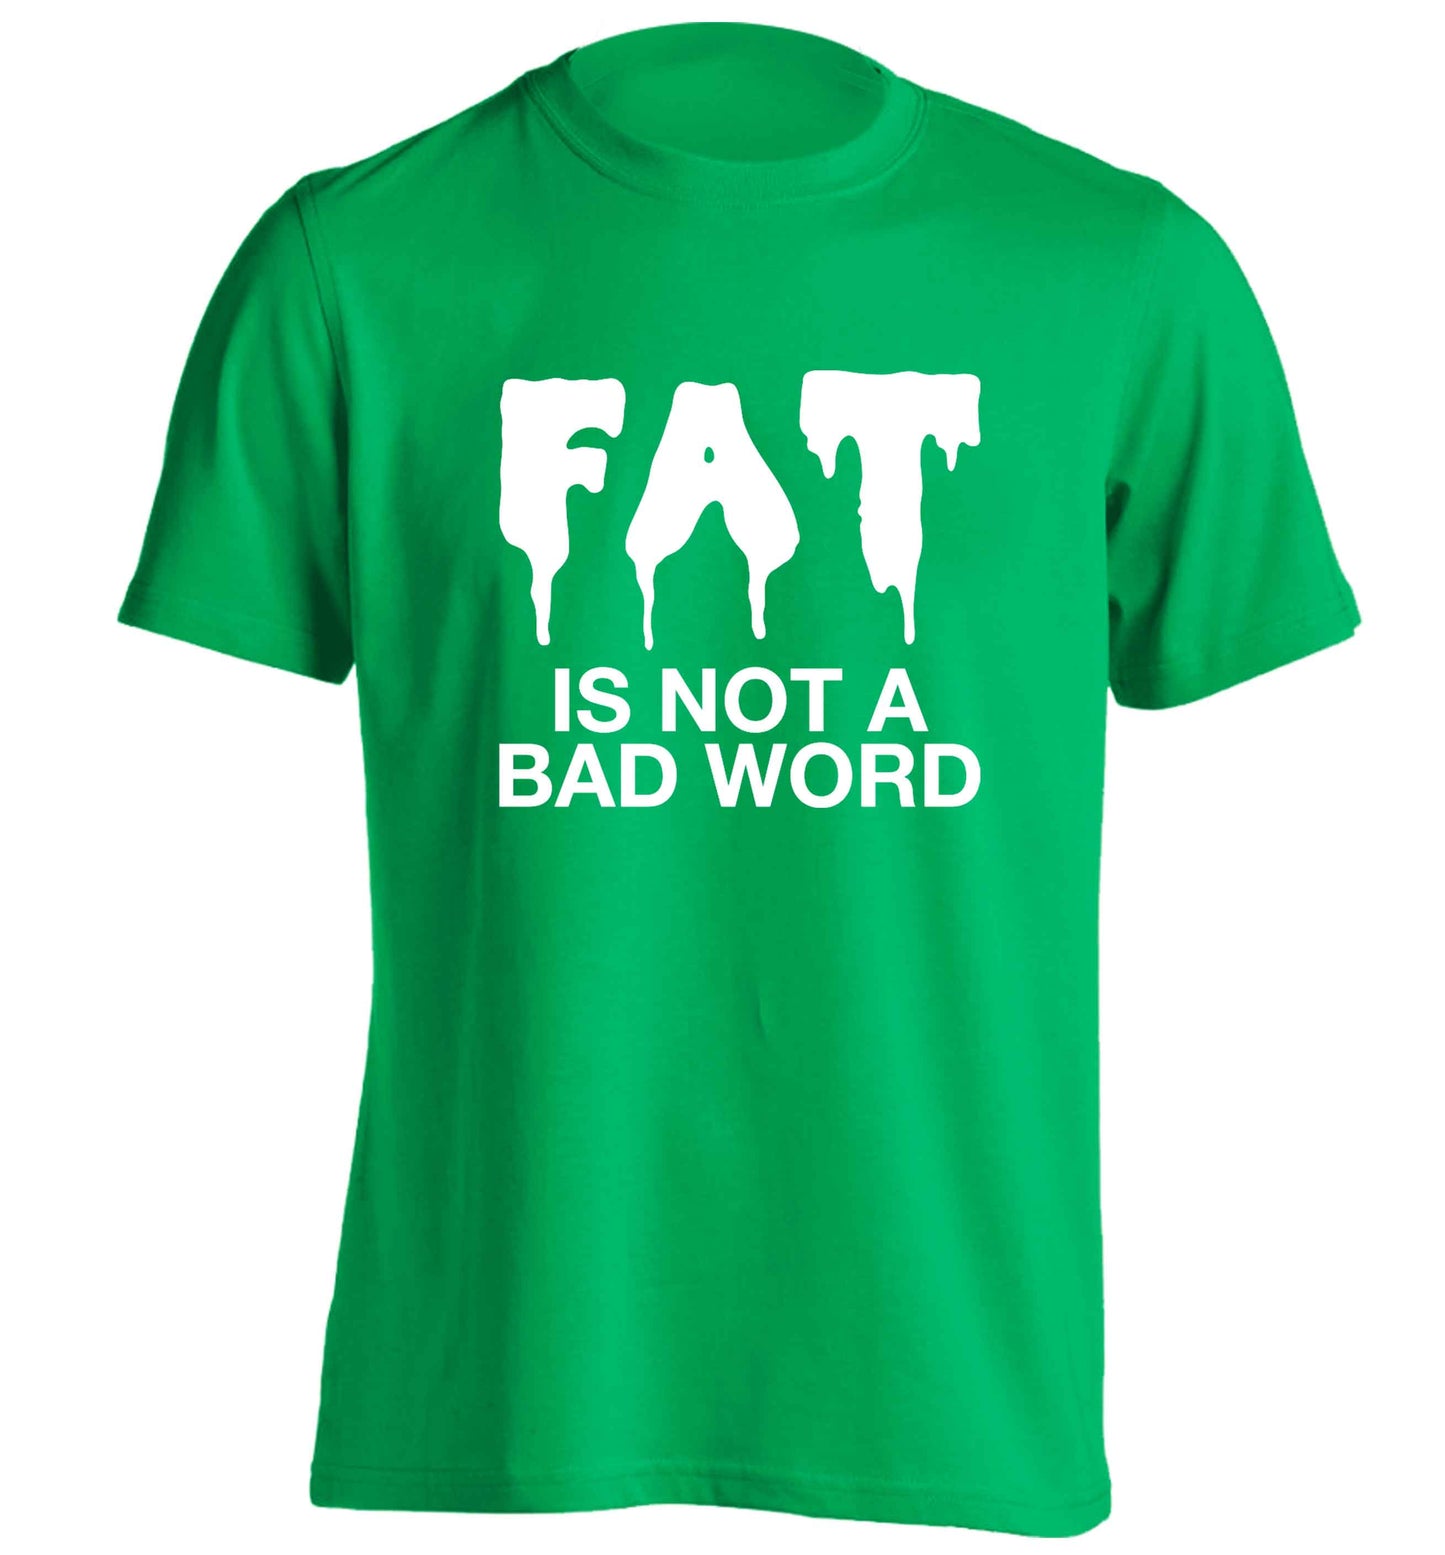 Fat is not a bad word adults unisex green Tshirt 2XL